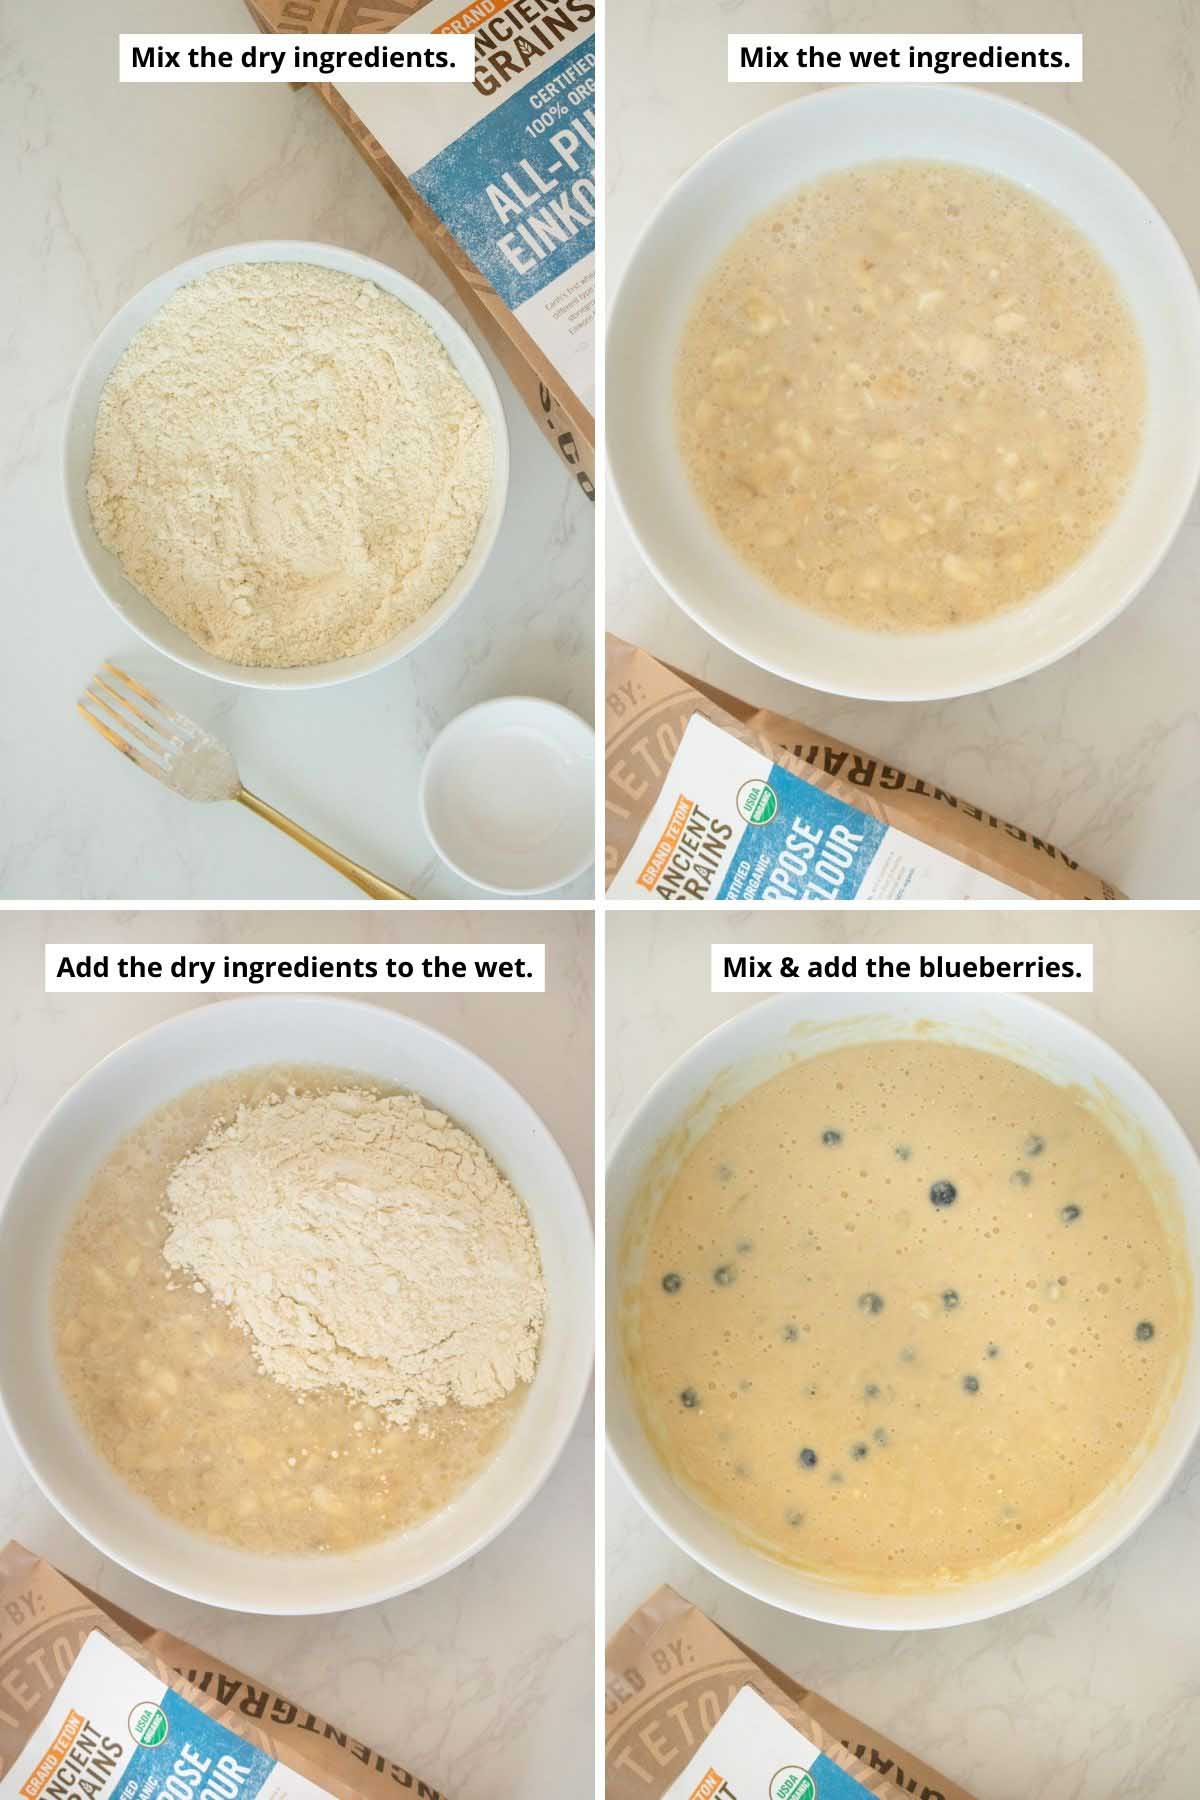 image collage showing the mixed dry ingredients, mixed wet ingredients, adding the wet ingredients to the dry, and the mixed batter with the blueberries added